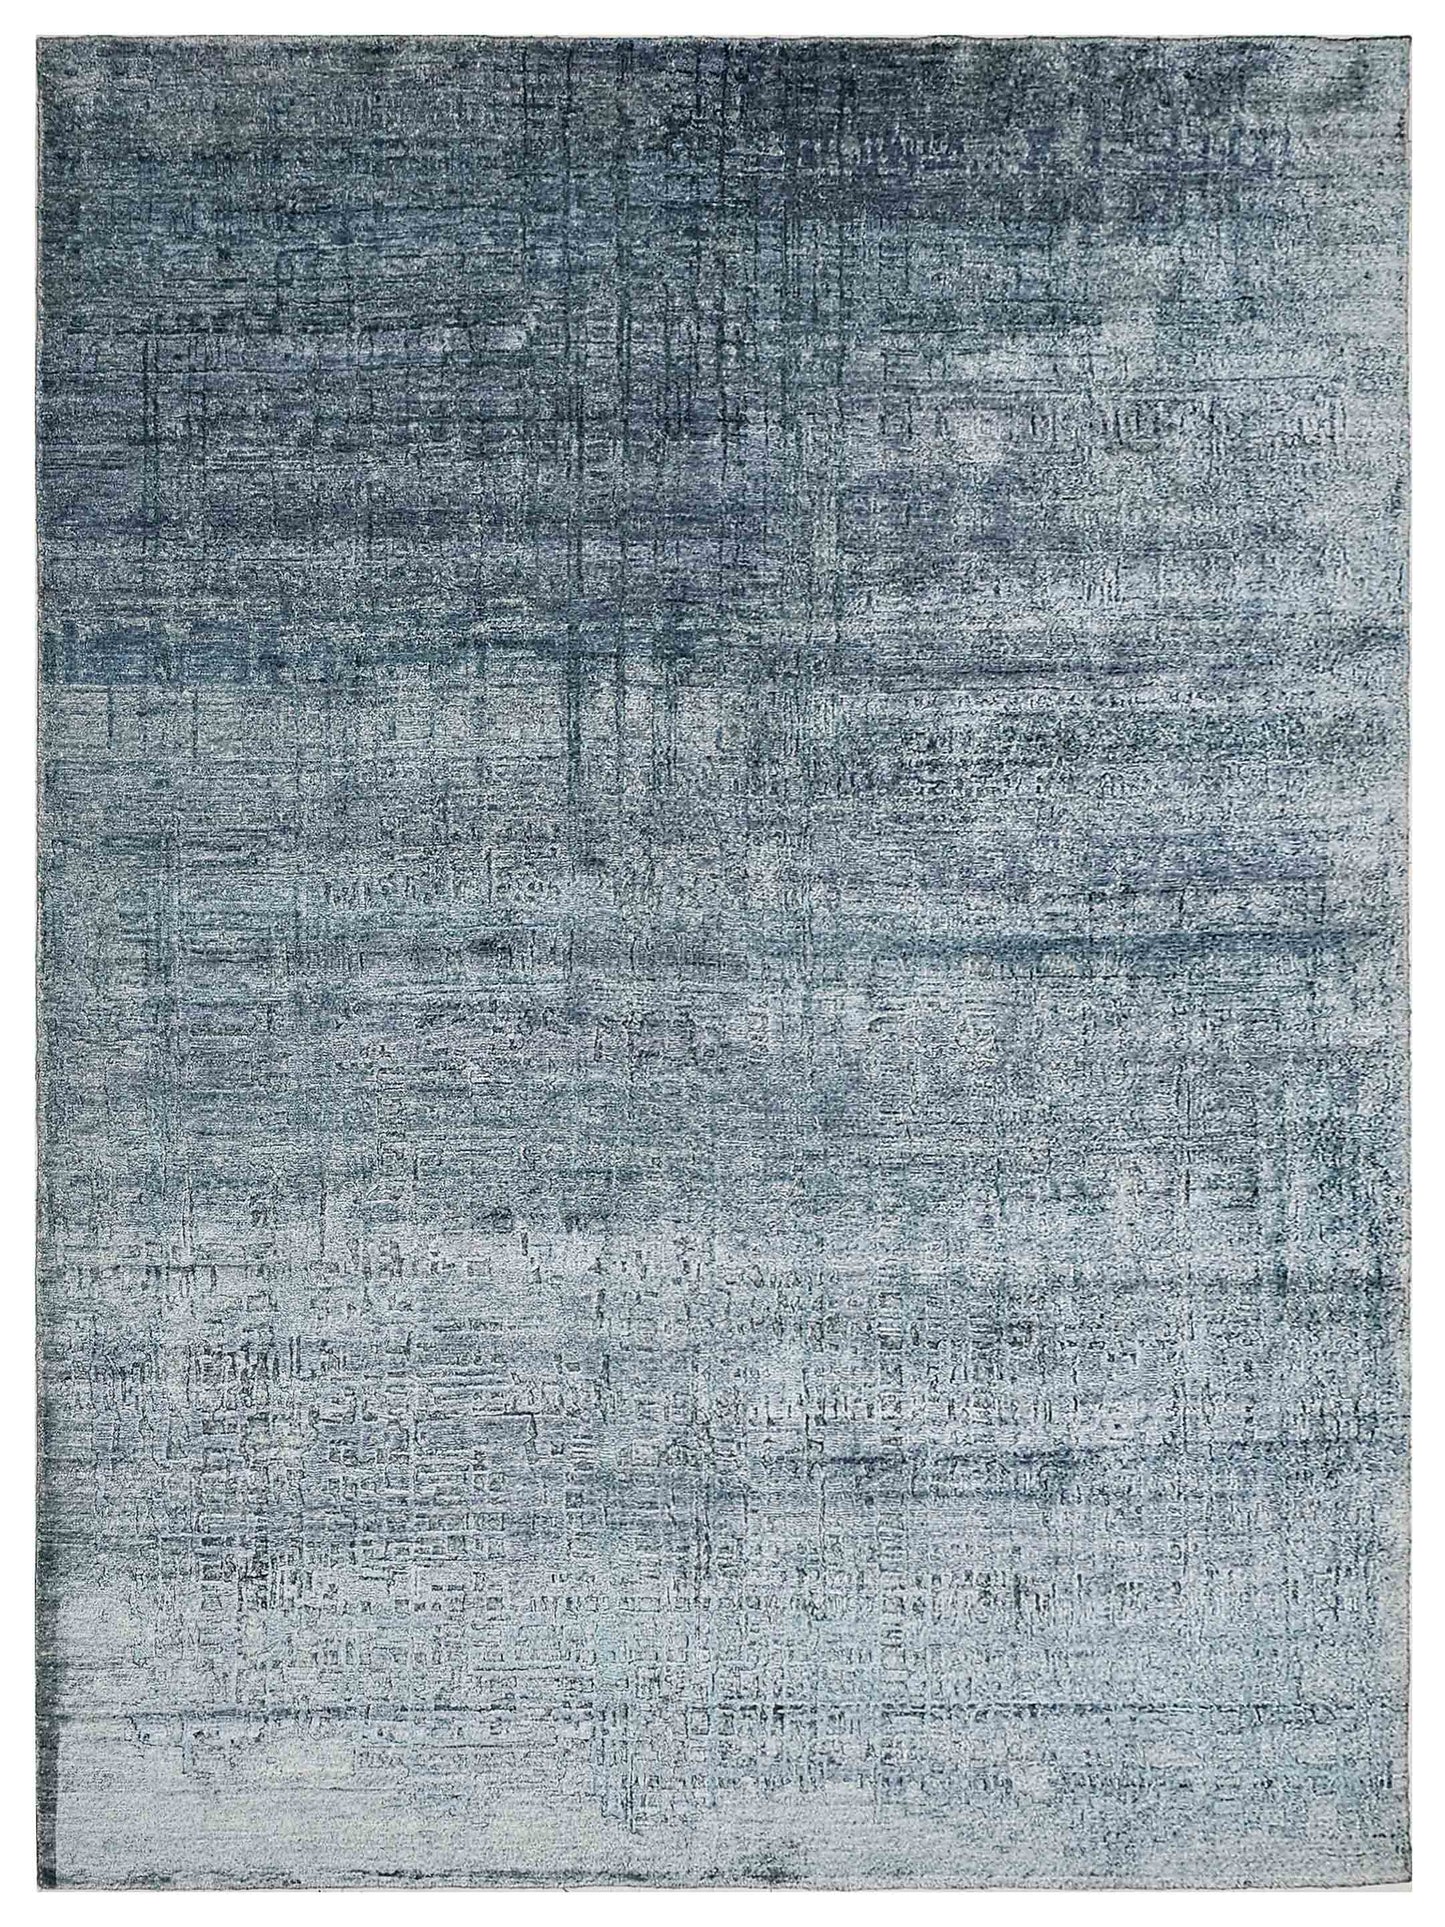 Artisan Mary MN-246 Green Contemporary Knotted Rug